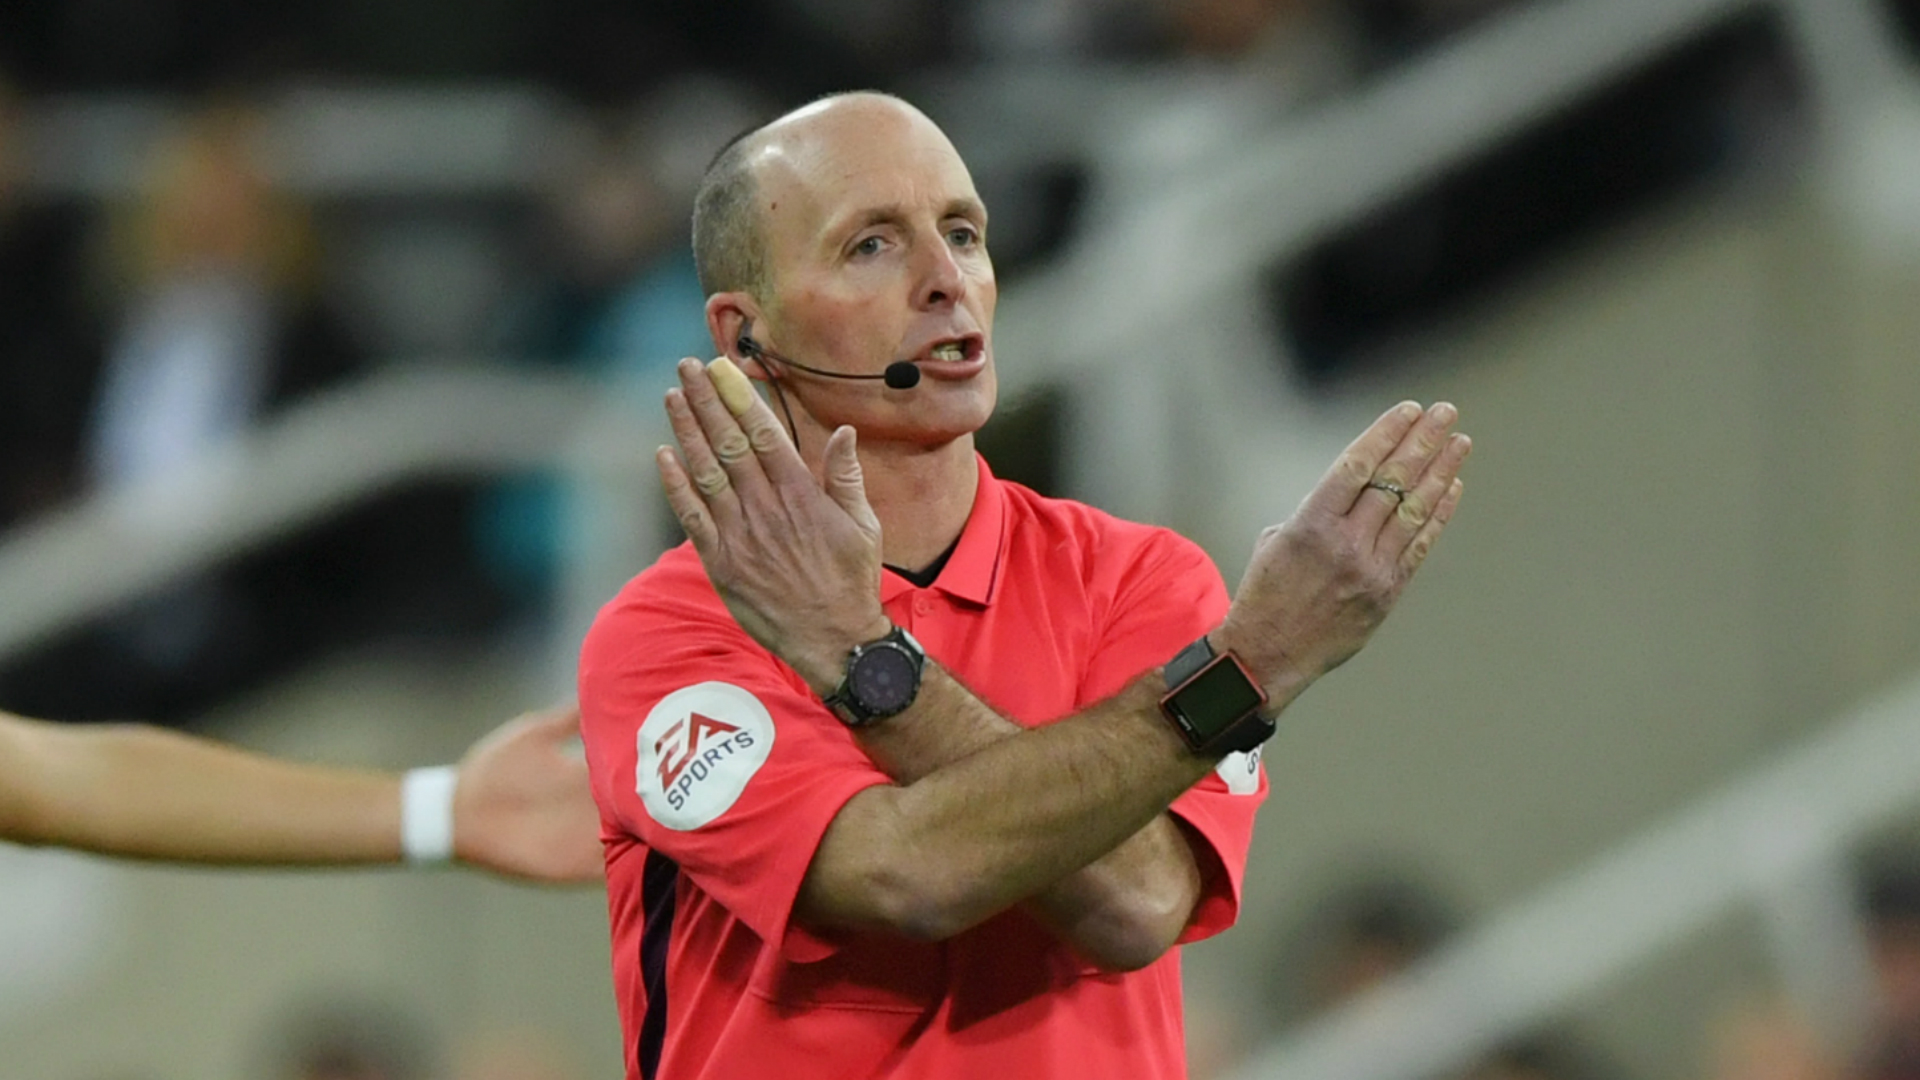 Mike Dean sent off DeAndre Yedlin and denied Ayoze Perez's penalty appeals, leading to Newcastle manager Rafael Benitez calling for VAR.